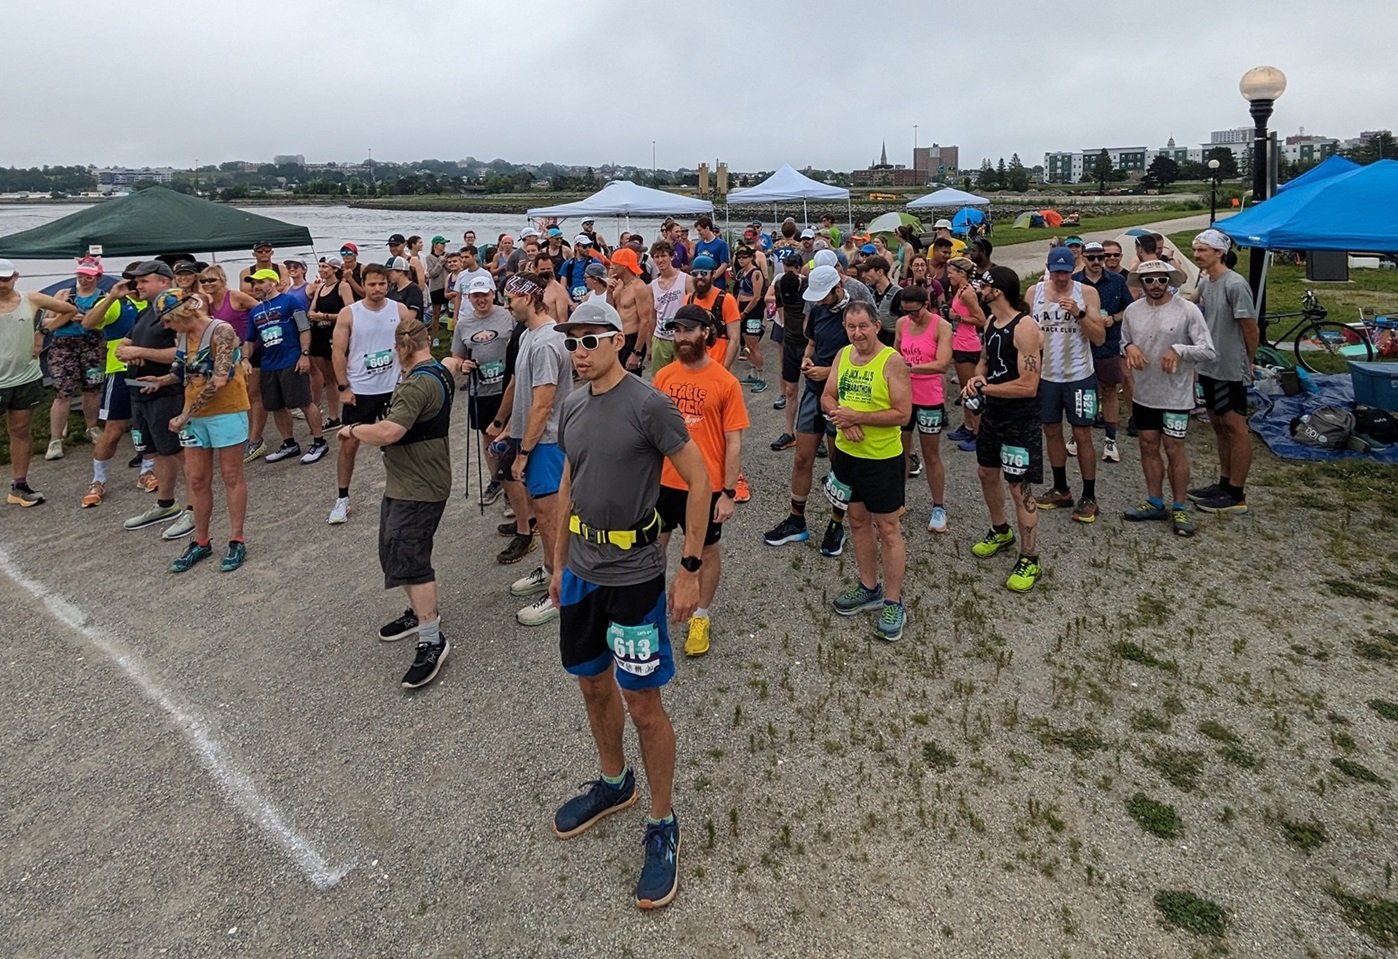 Runners at the start of the Back Cove Backyard Ultra in Portland Maine.